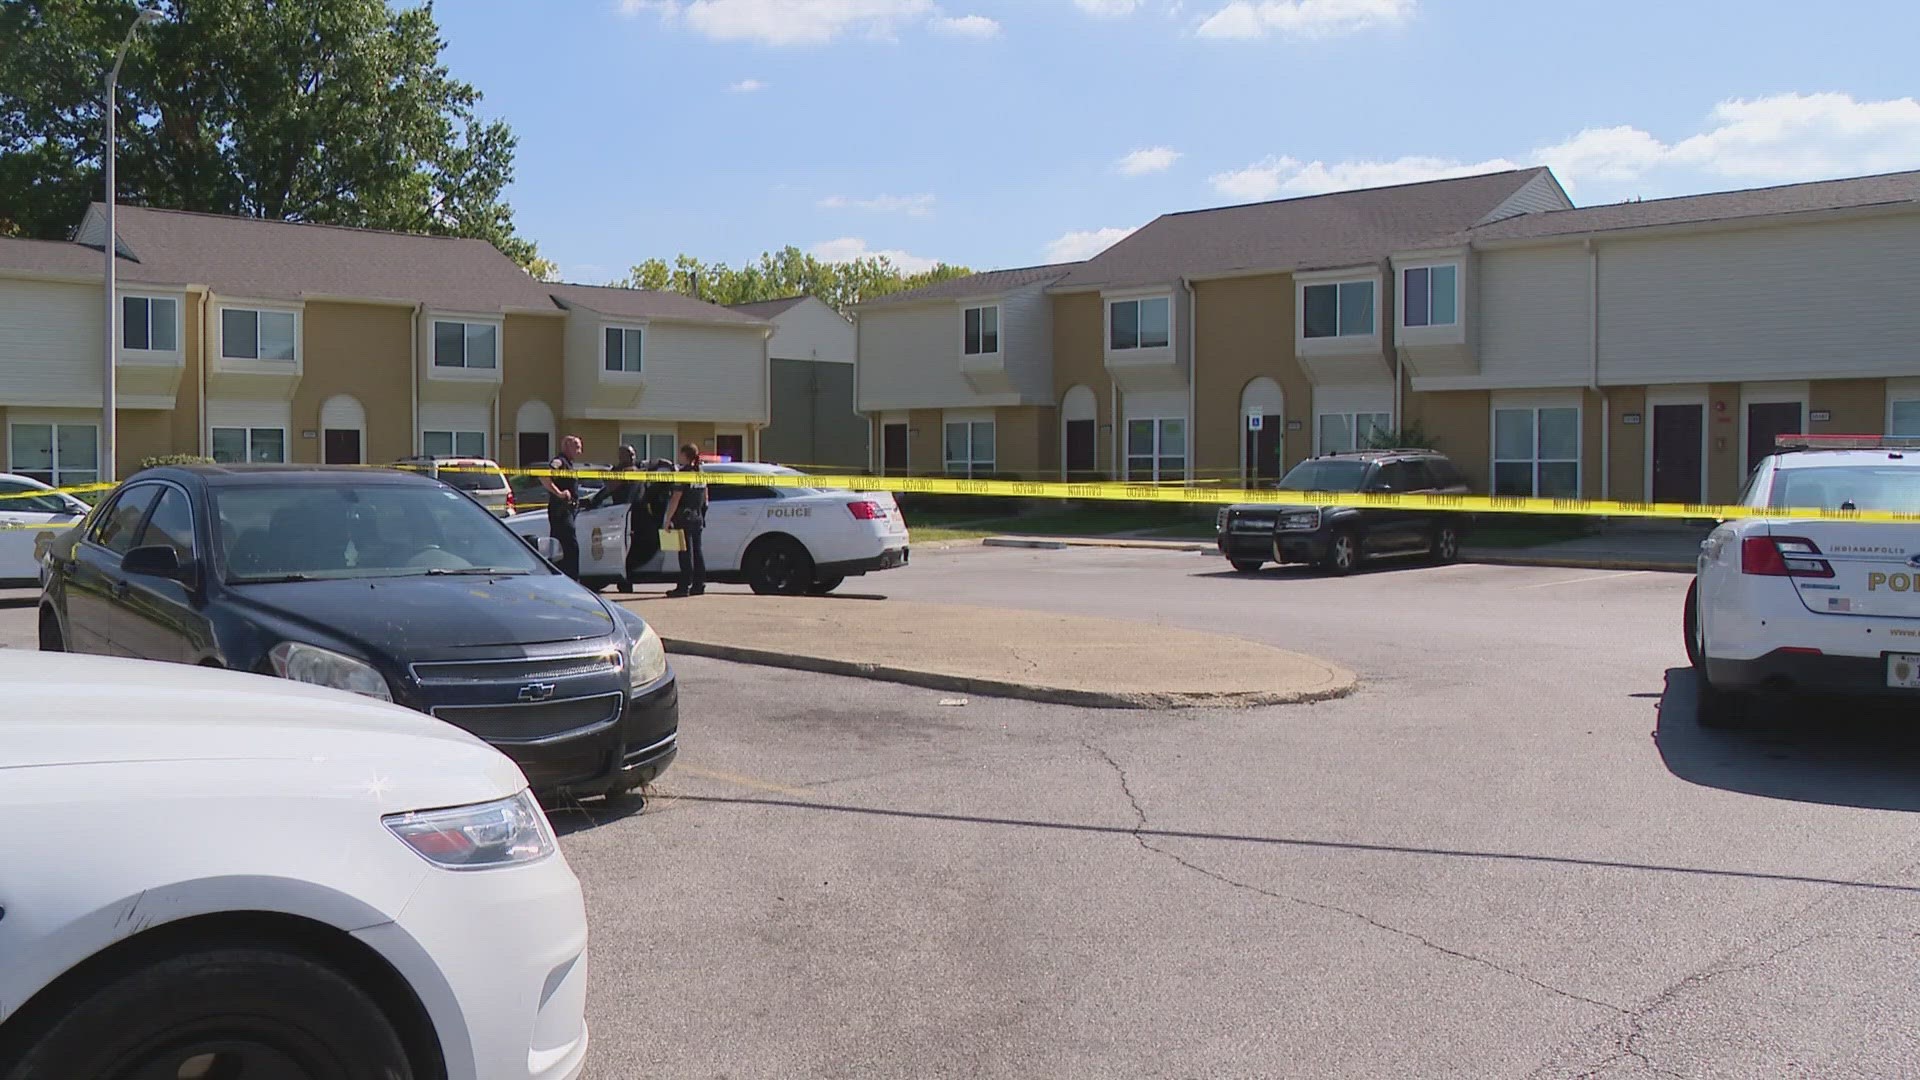 32-year old Stephen Hale died yesterday morning.. at the Amber Woods apartments near 38th and Mitthoeffer.